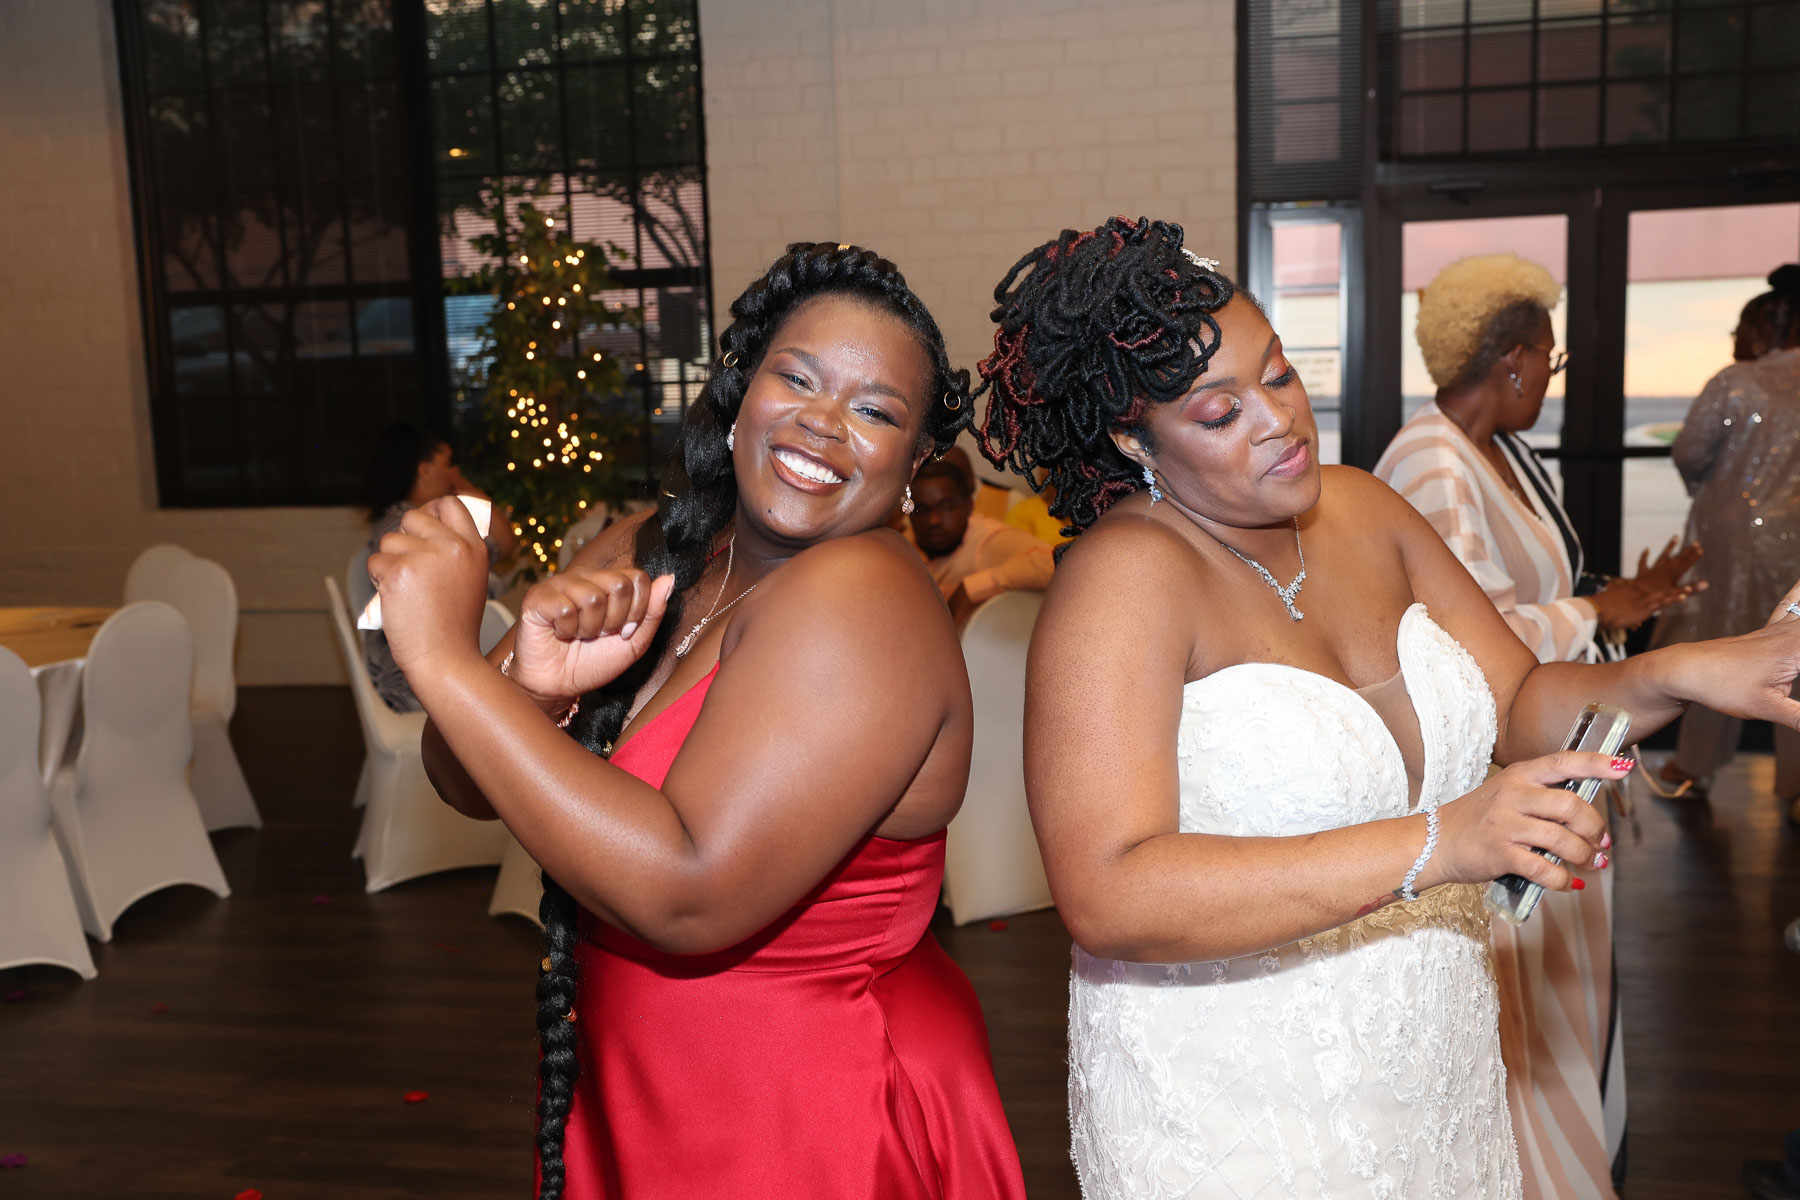 The bride and her bridesmaid dancing